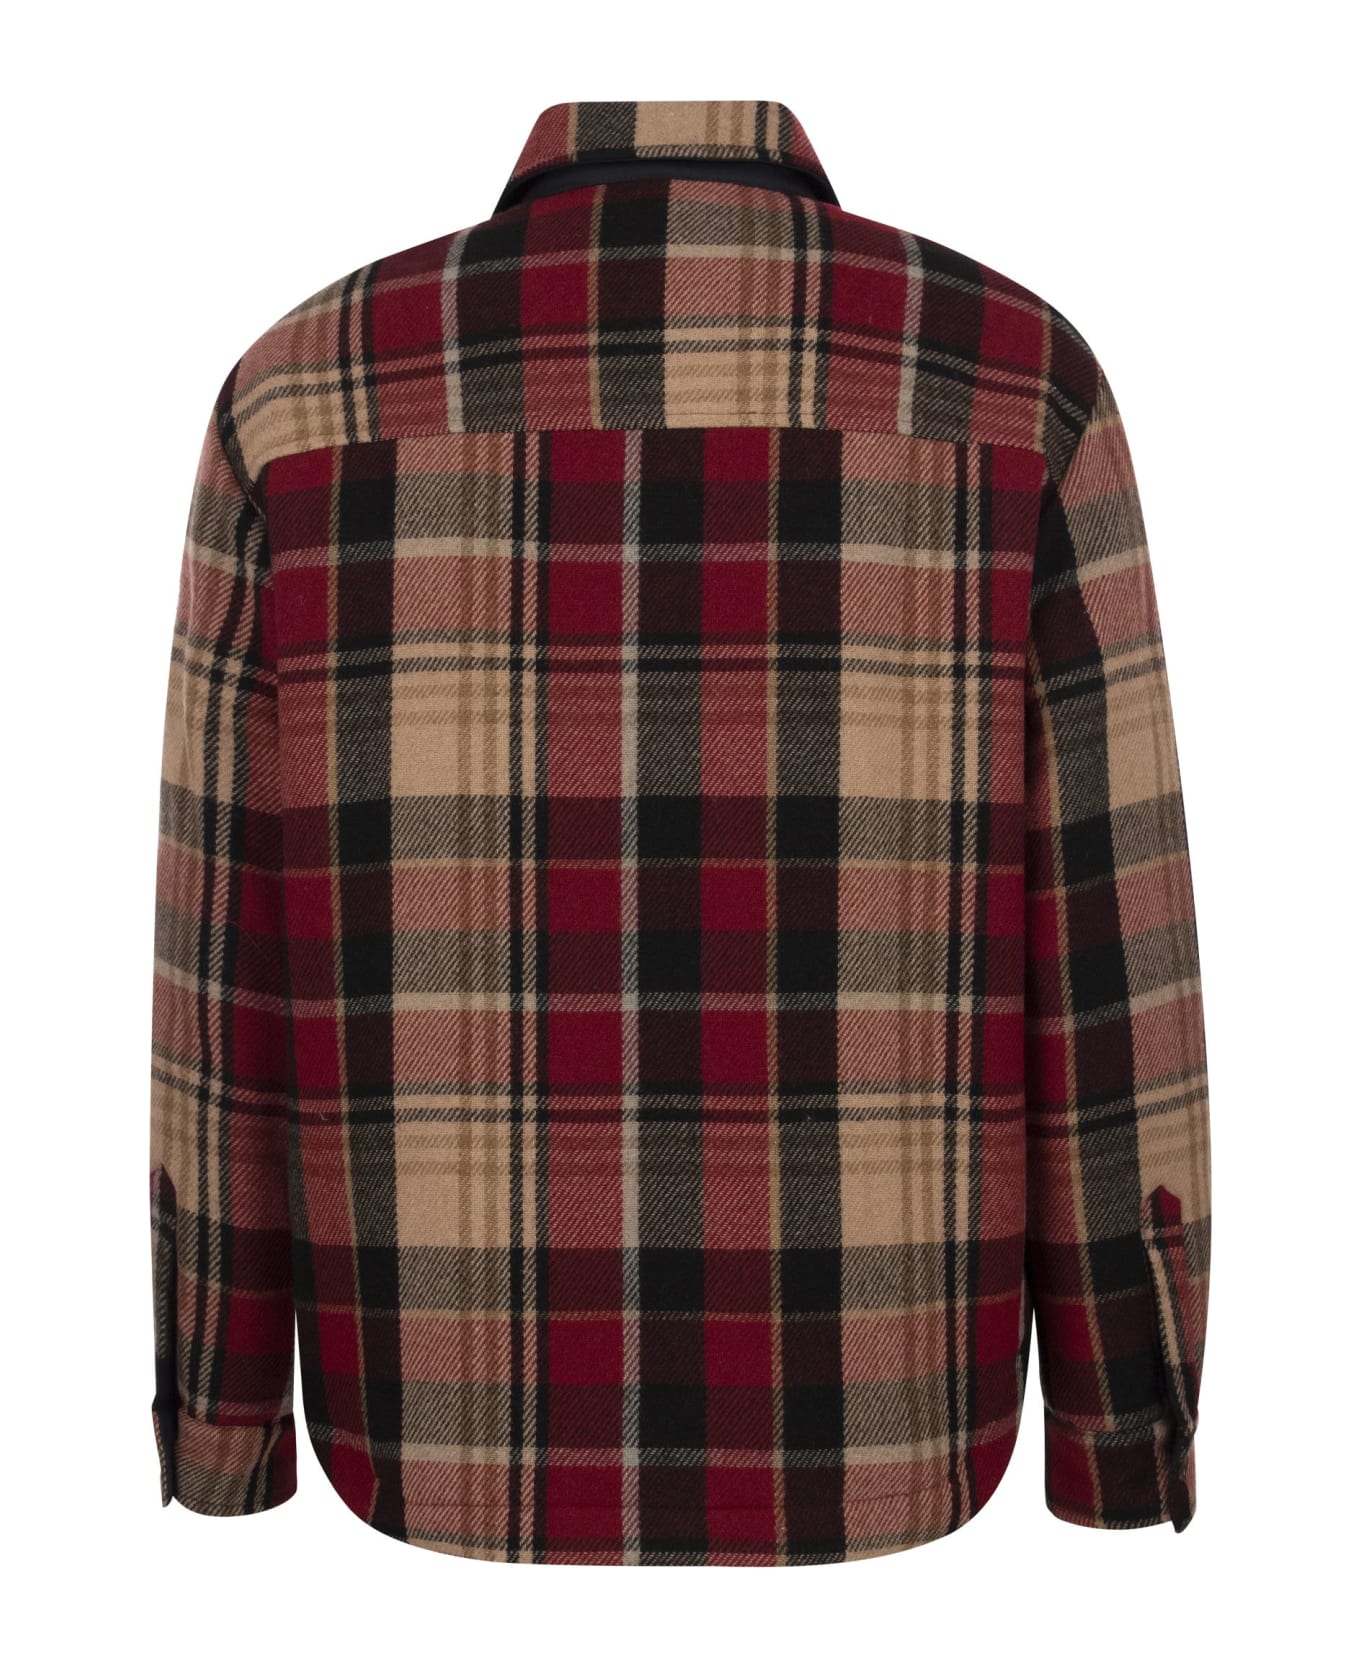 Fay Shirt-cut Check Jacket - Red/beige